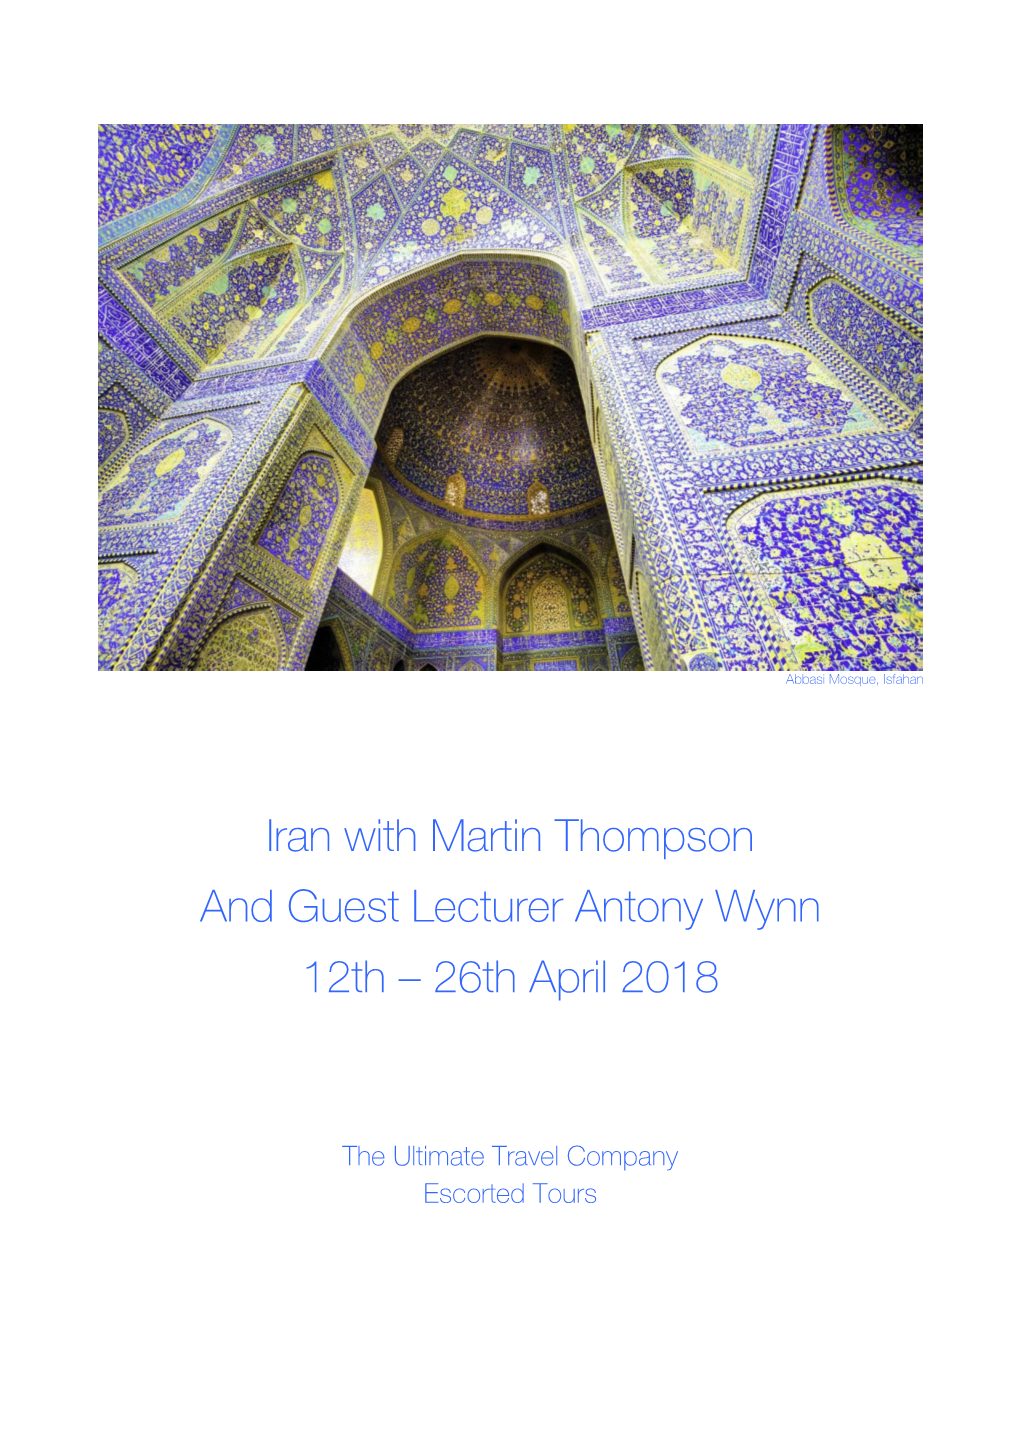 Iran with Martin Thompson and Guest Lecturer Antony Wynn 12Th – 26Th April 2018